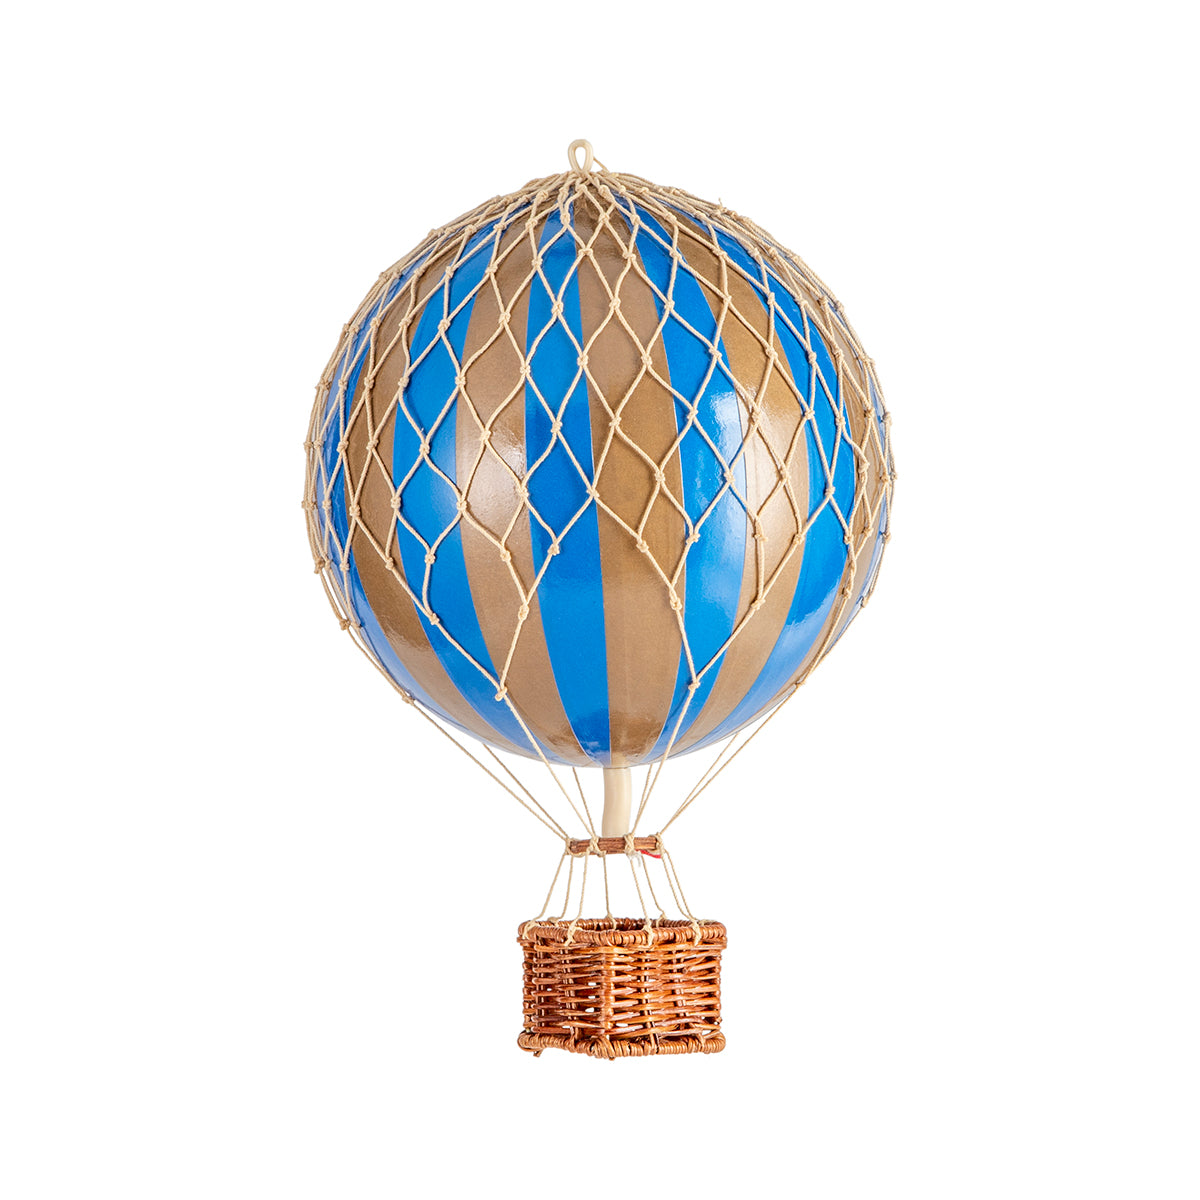 A quirky Wonderen Small Hot Air Balloon - Travels Light in blue and brown floats against a white background.